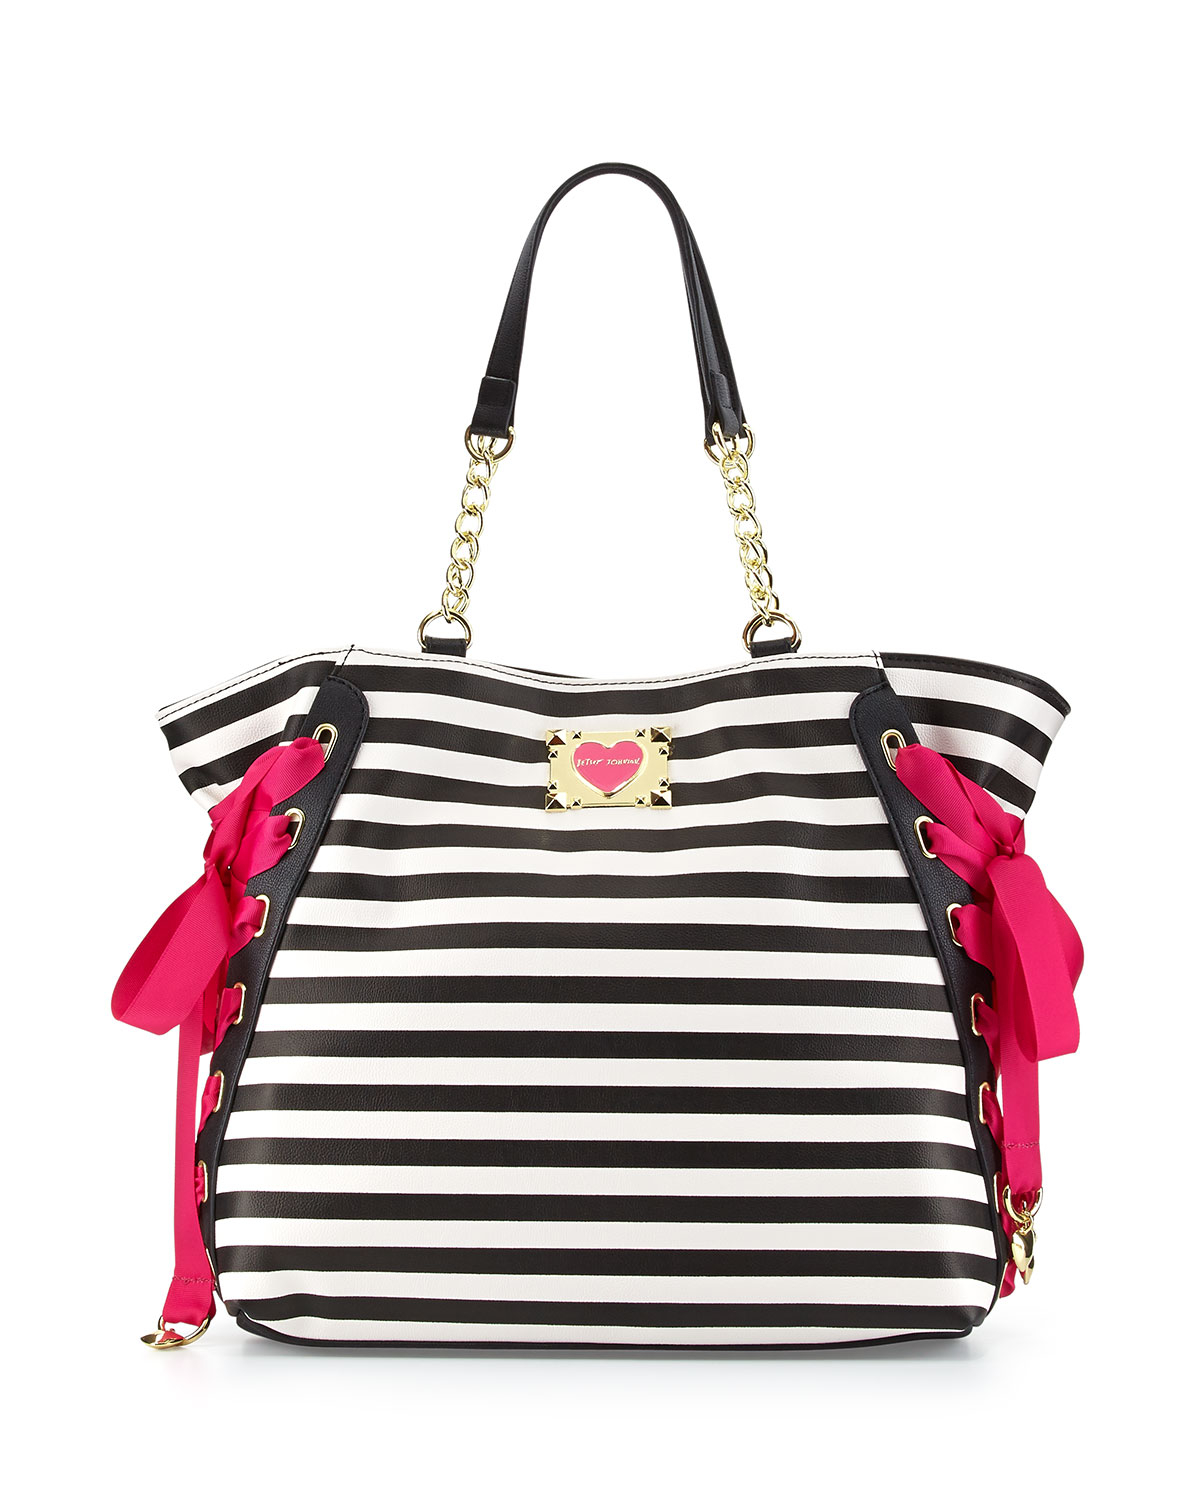 Lyst - Betsey Johnson Mix-N-Match Tote Bag in Black